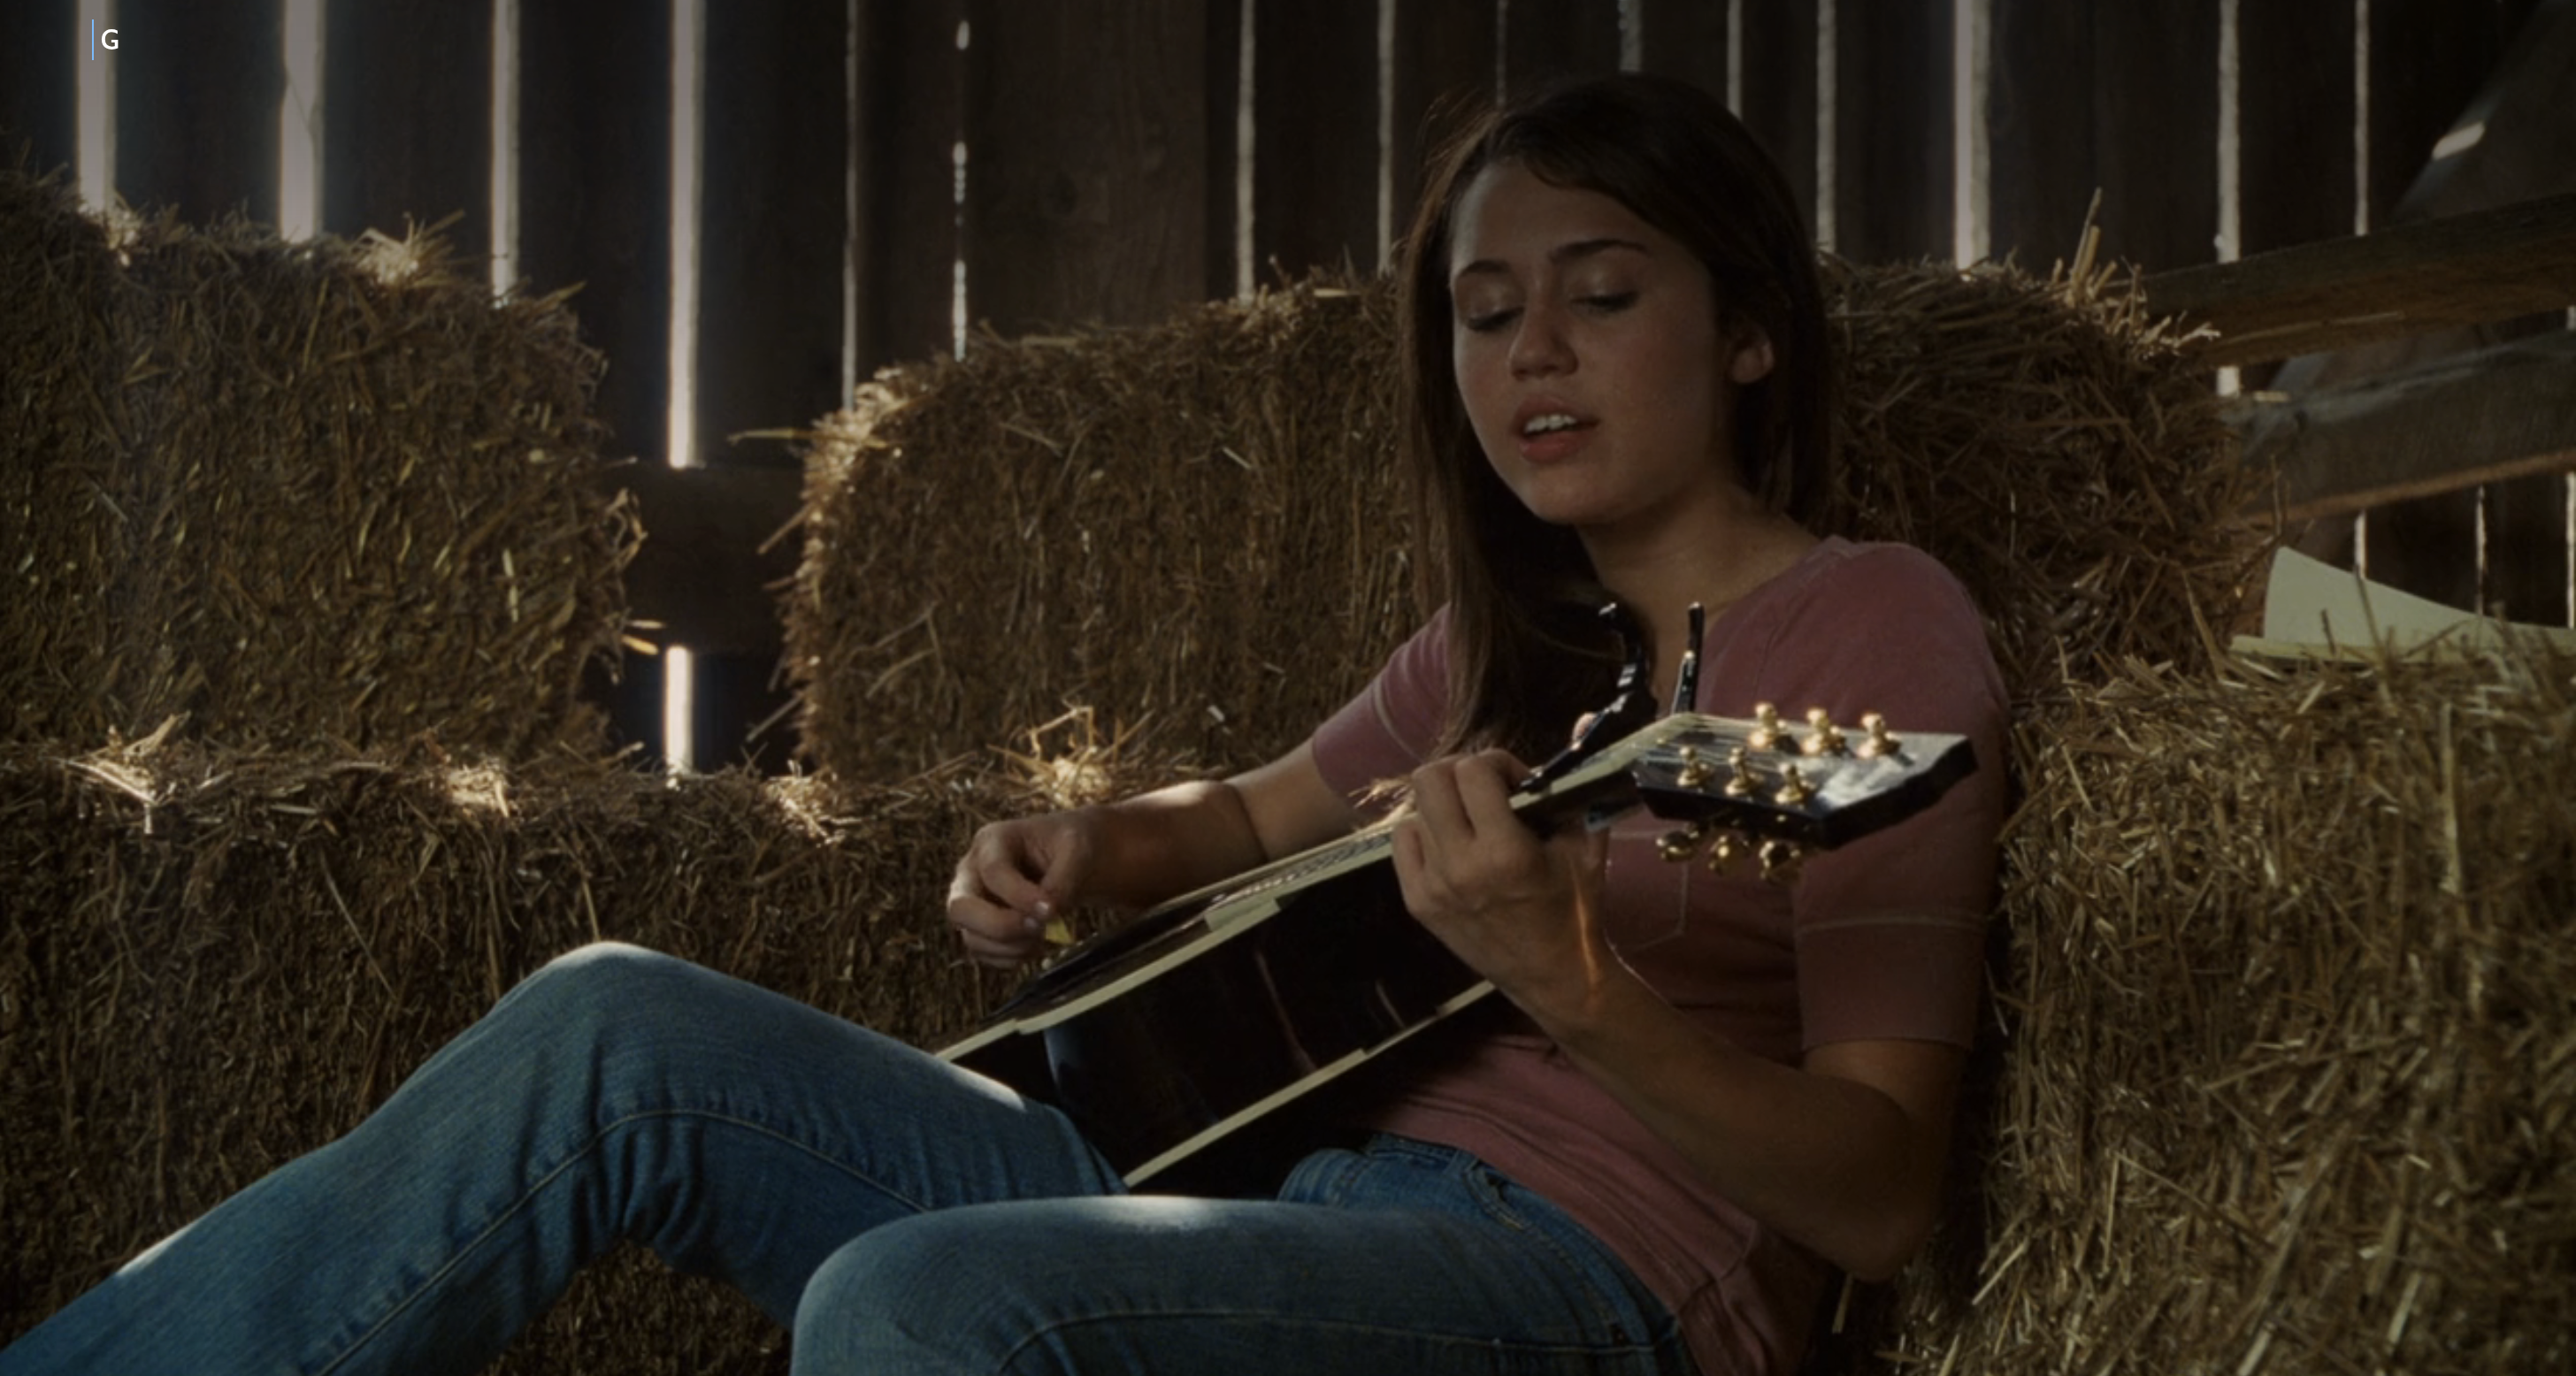 Miley Stewart (Miley Cyrus) plays the guitar while sitting on hay in a barn in a scene from &quot;Hannah Montana: The Movie.&quot;